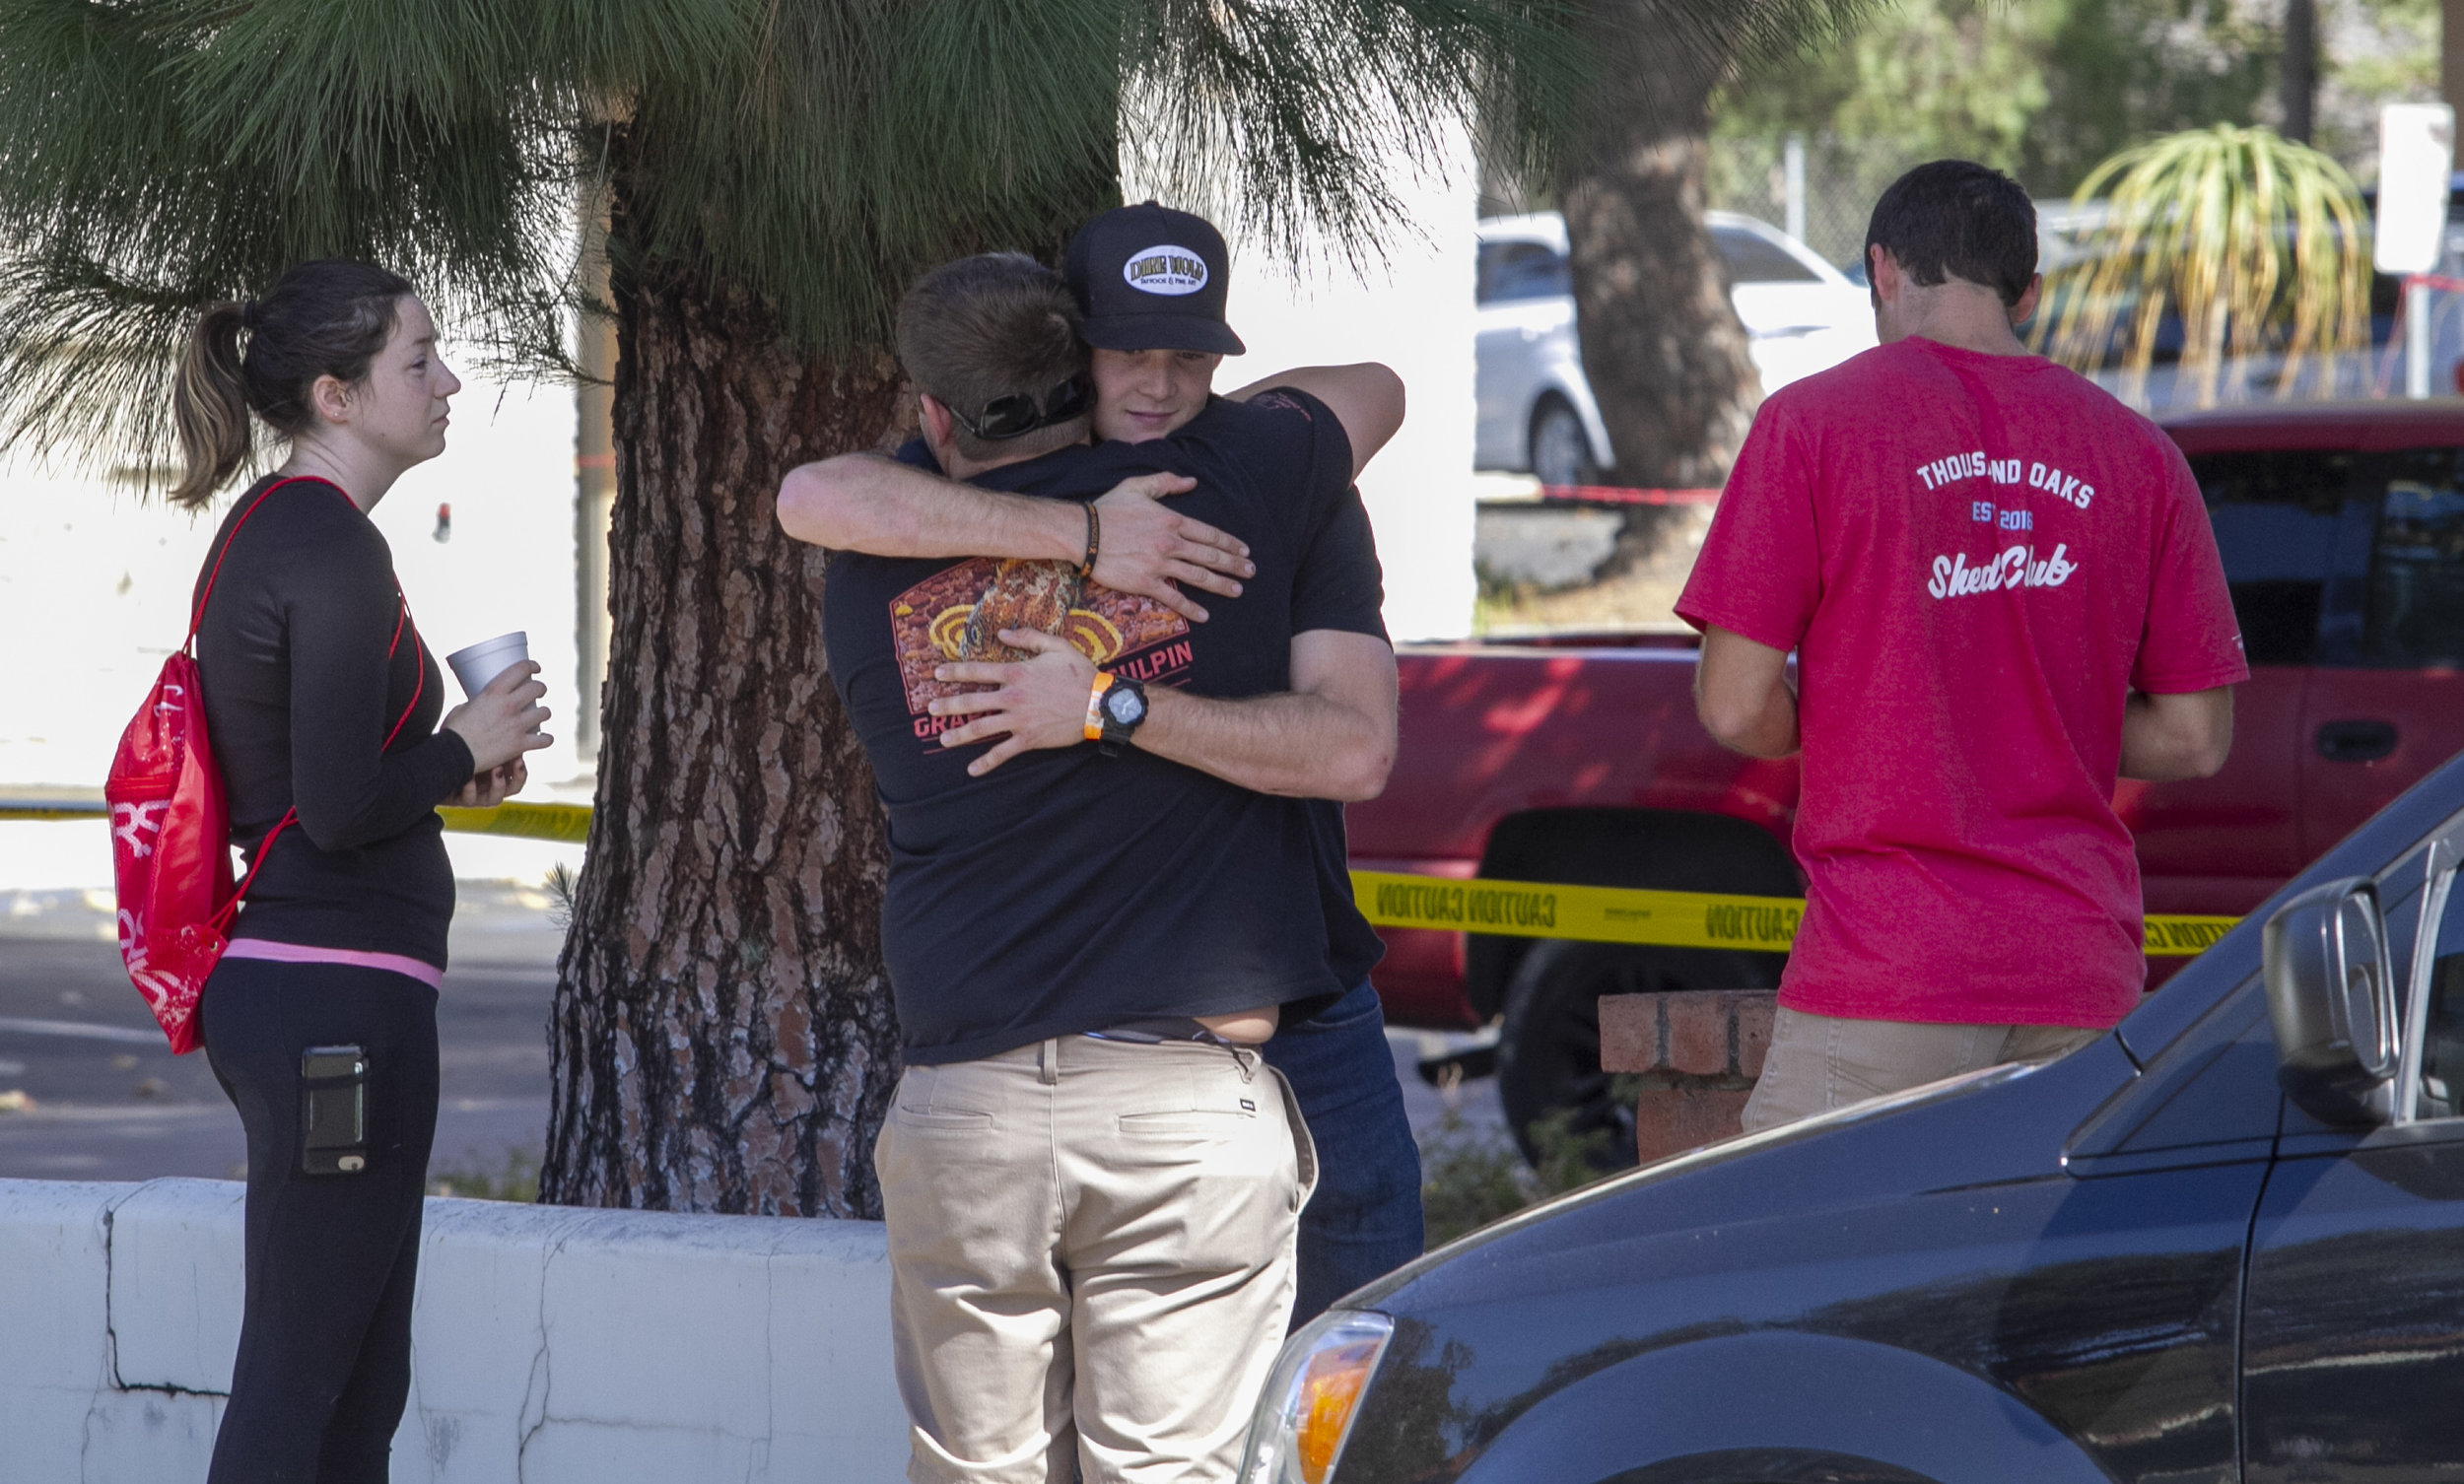  People comfort each other while waiting to speak to authorities. Ian David Long, 28, killed at least 13 and injured more than a dozen at Borderline Bar &amp; Grill in Thousand Oaks, CA on Wednesday, Nov. 7 2018. (Andrew Navarro/ Corsair Staff) 